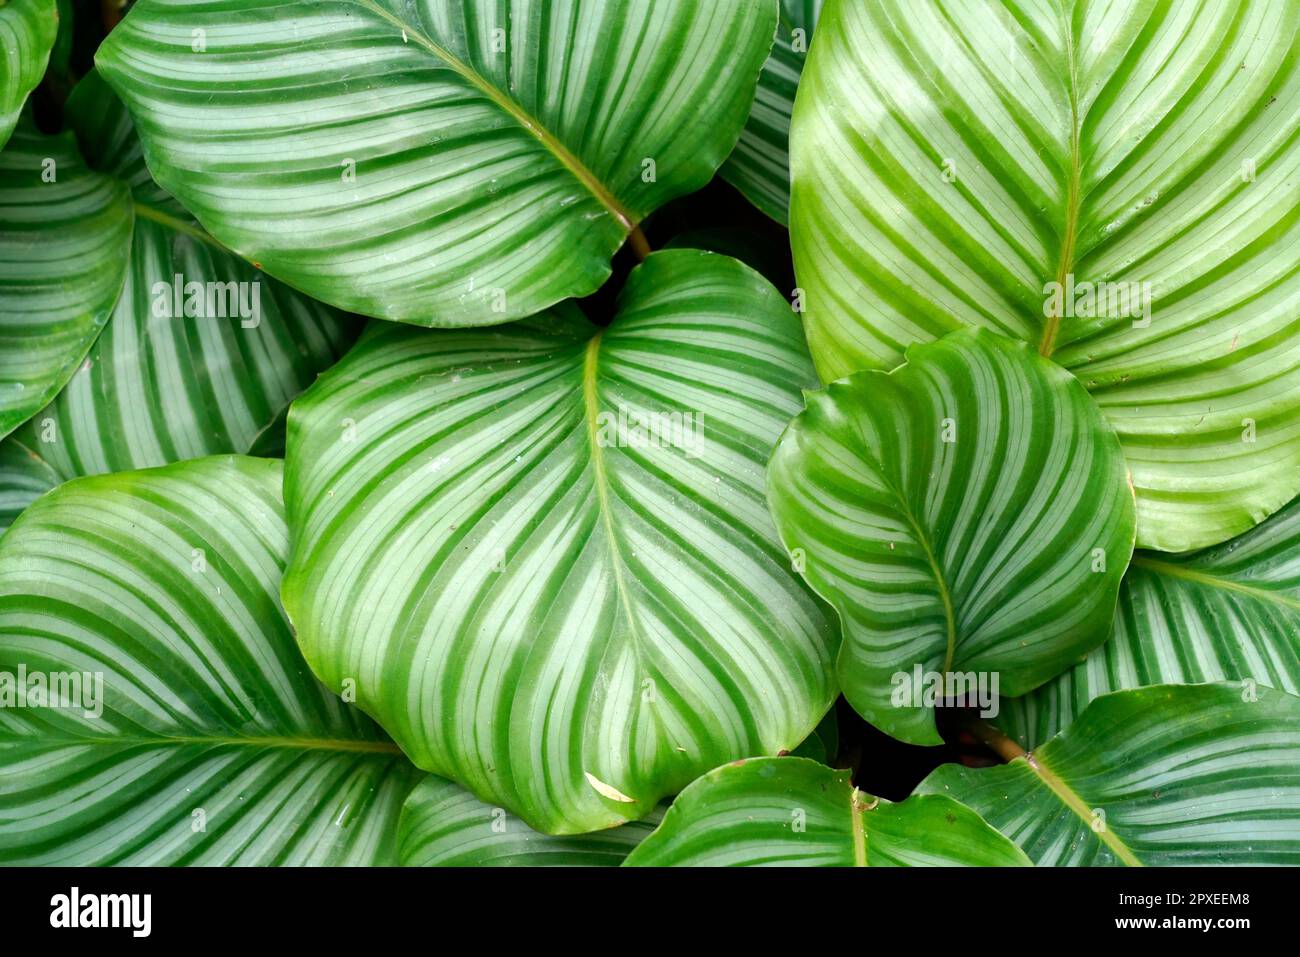 Calathea is a genus of flowering plants belonging to the family Marantaceae, Orticola the Market Exhibition of unusual, rare and ancient flowers, plan Stock Photo